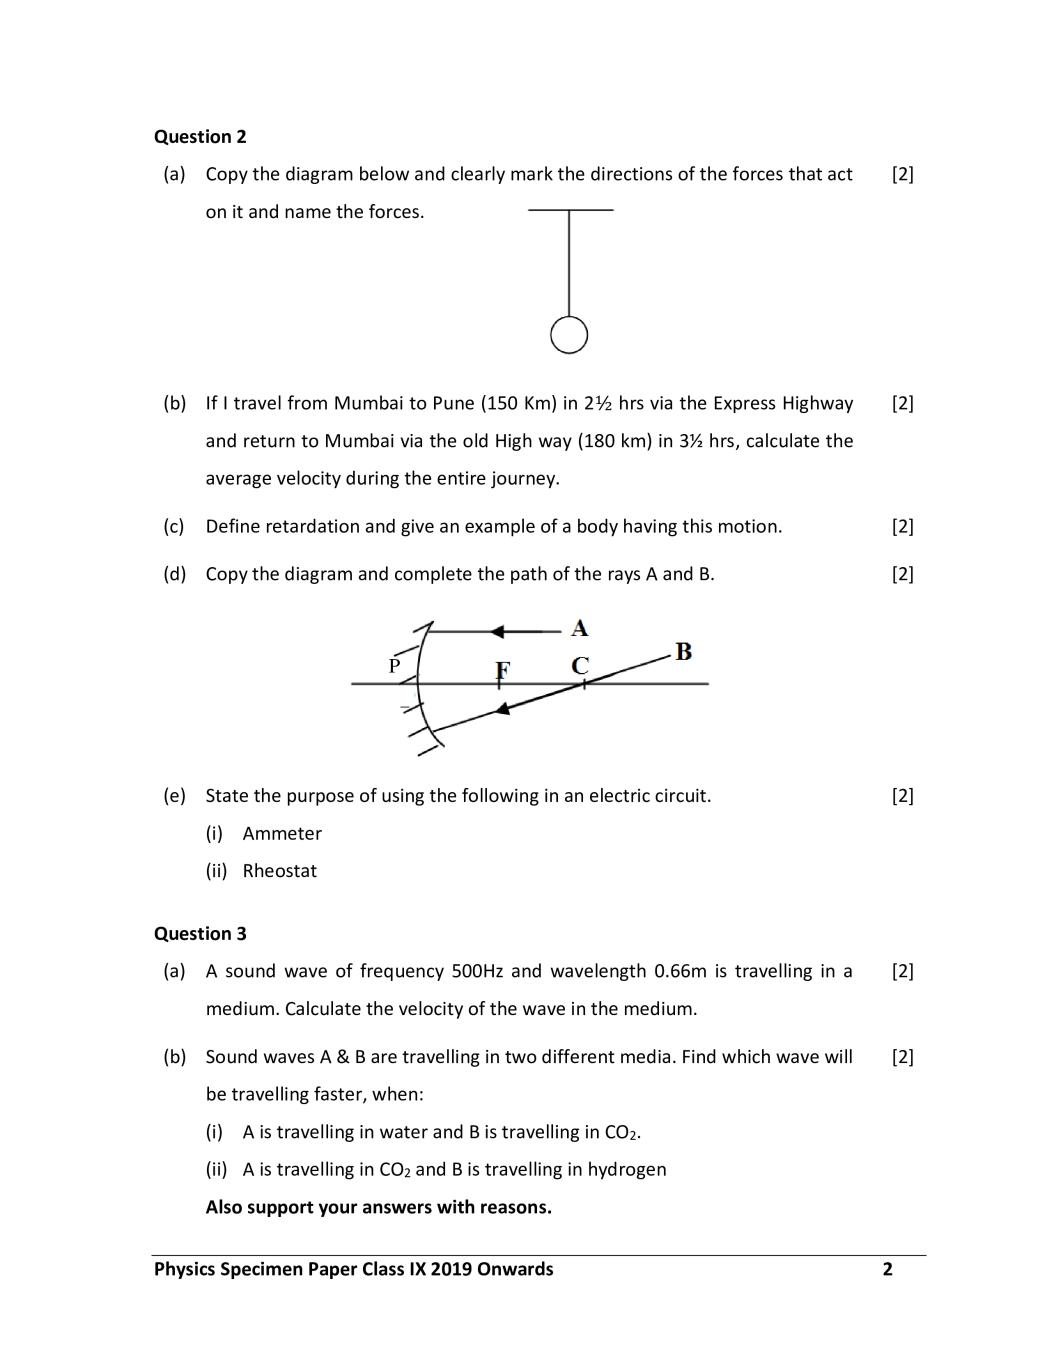 assignment of class 9 physics answer